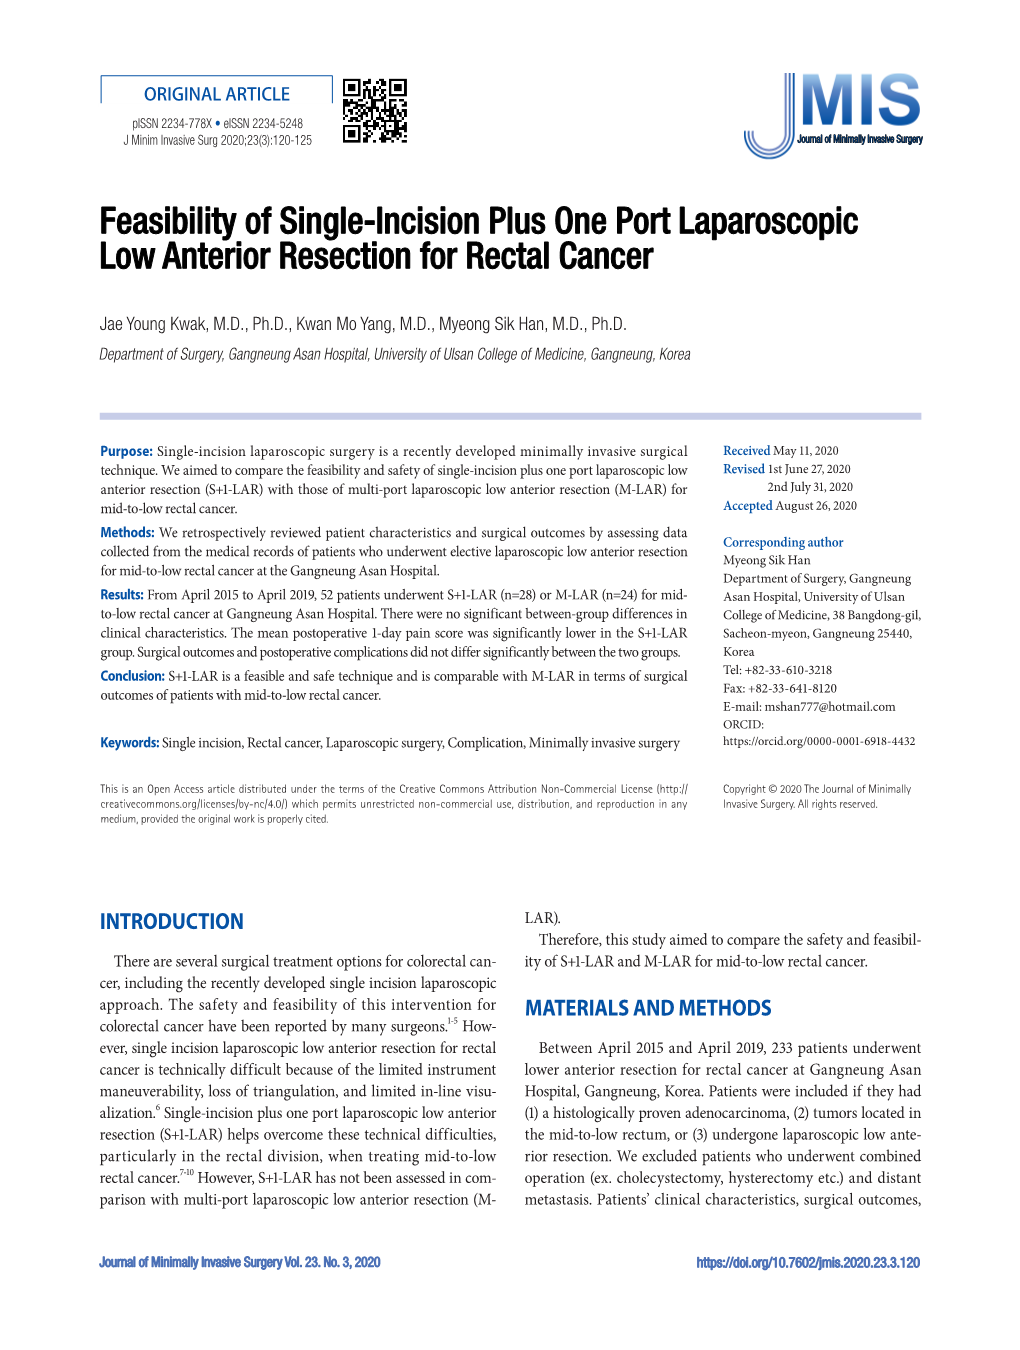 Feasibility of Single-Incision Plus One Port Laparoscopic Low Anterior Resection for Rectal Cancer